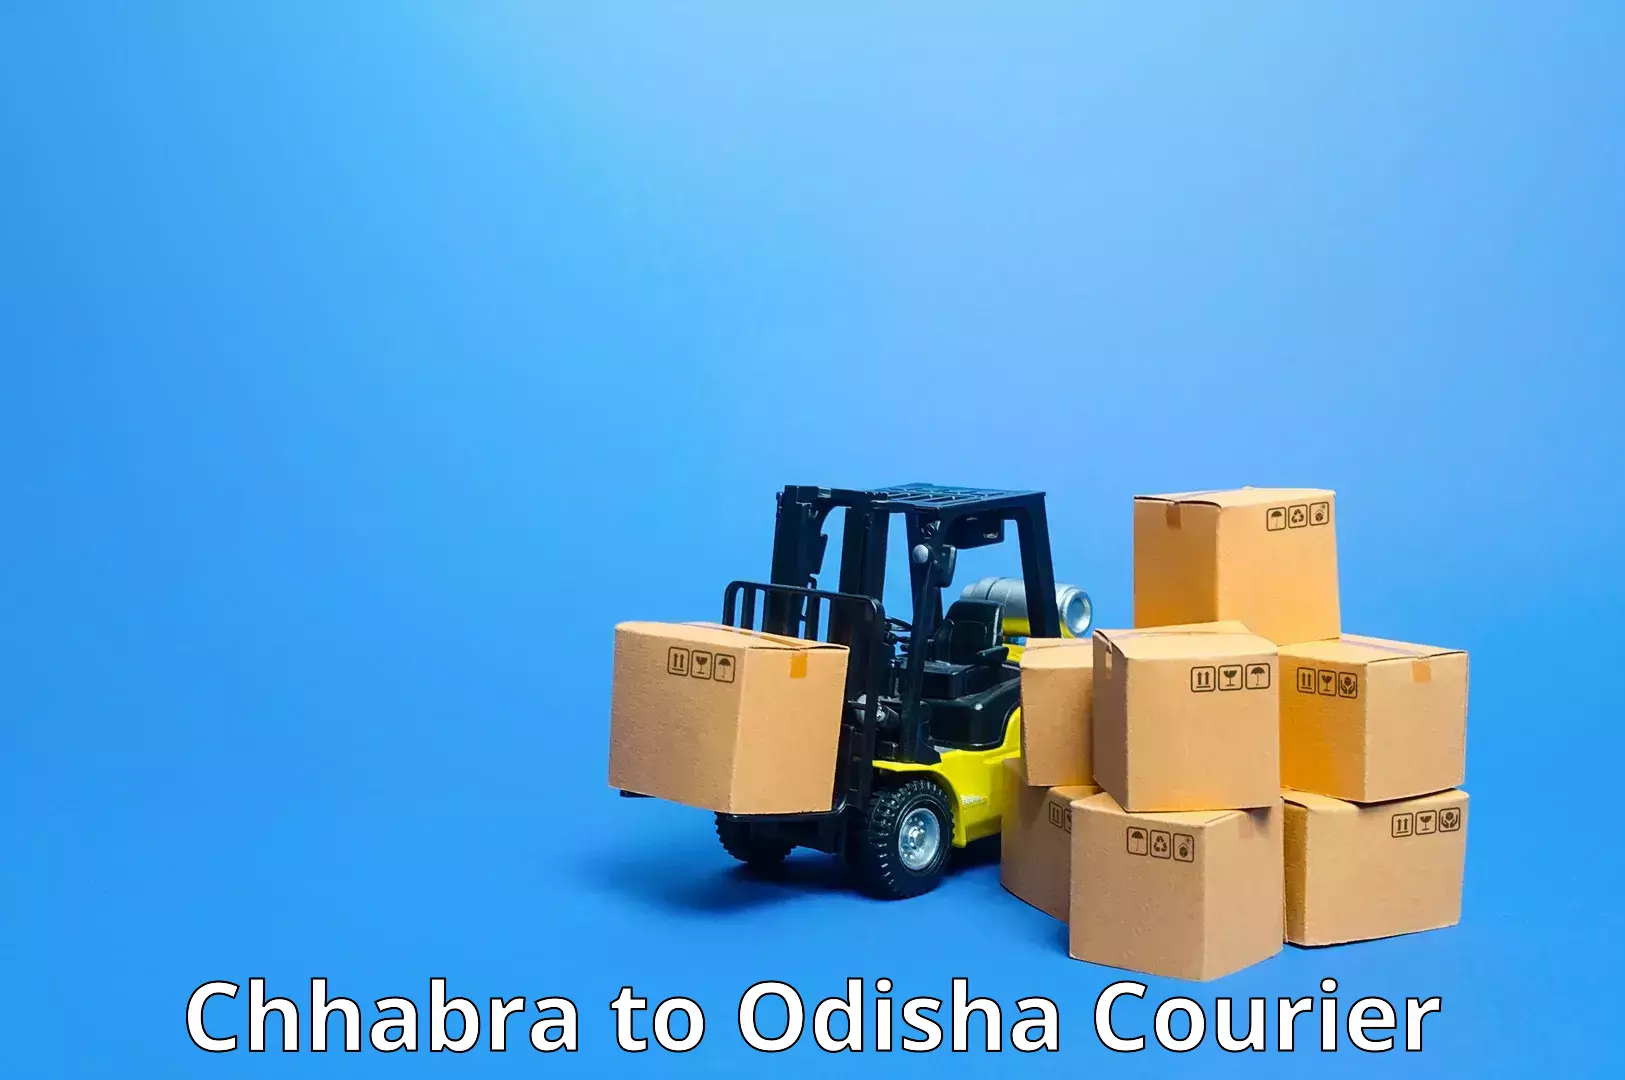 Nationwide shipping capabilities Chhabra to Paradip Port